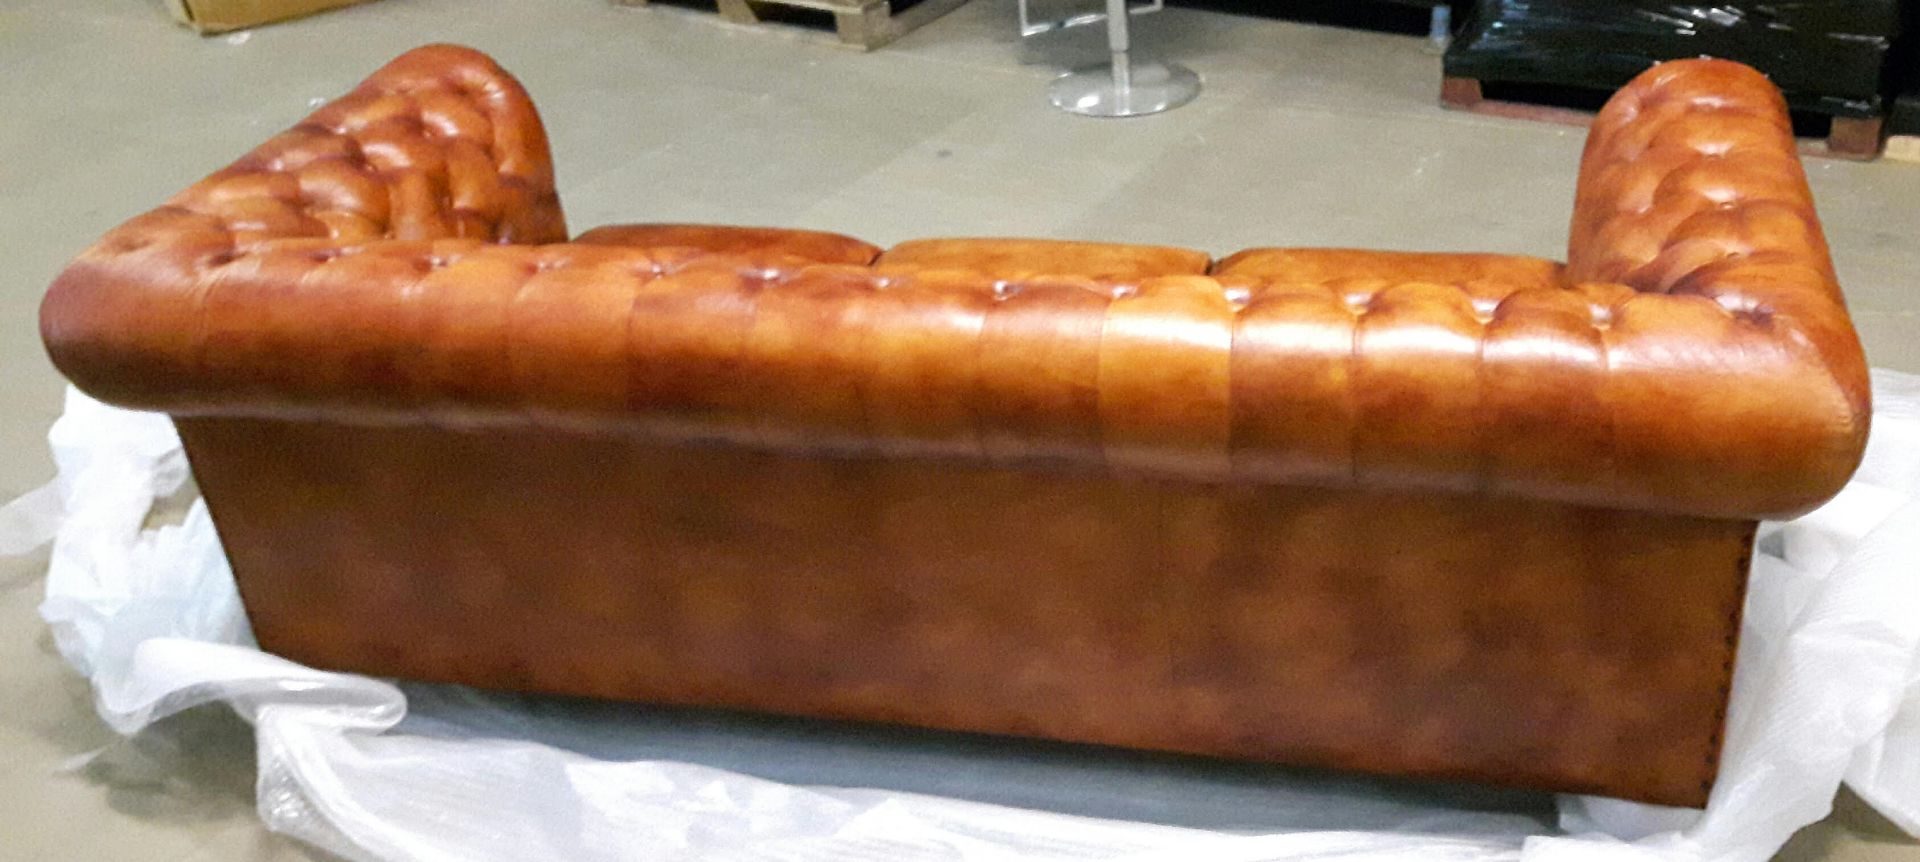 Retro 3 seater Leather Tan Chesterfield Sofa - Image 4 of 4